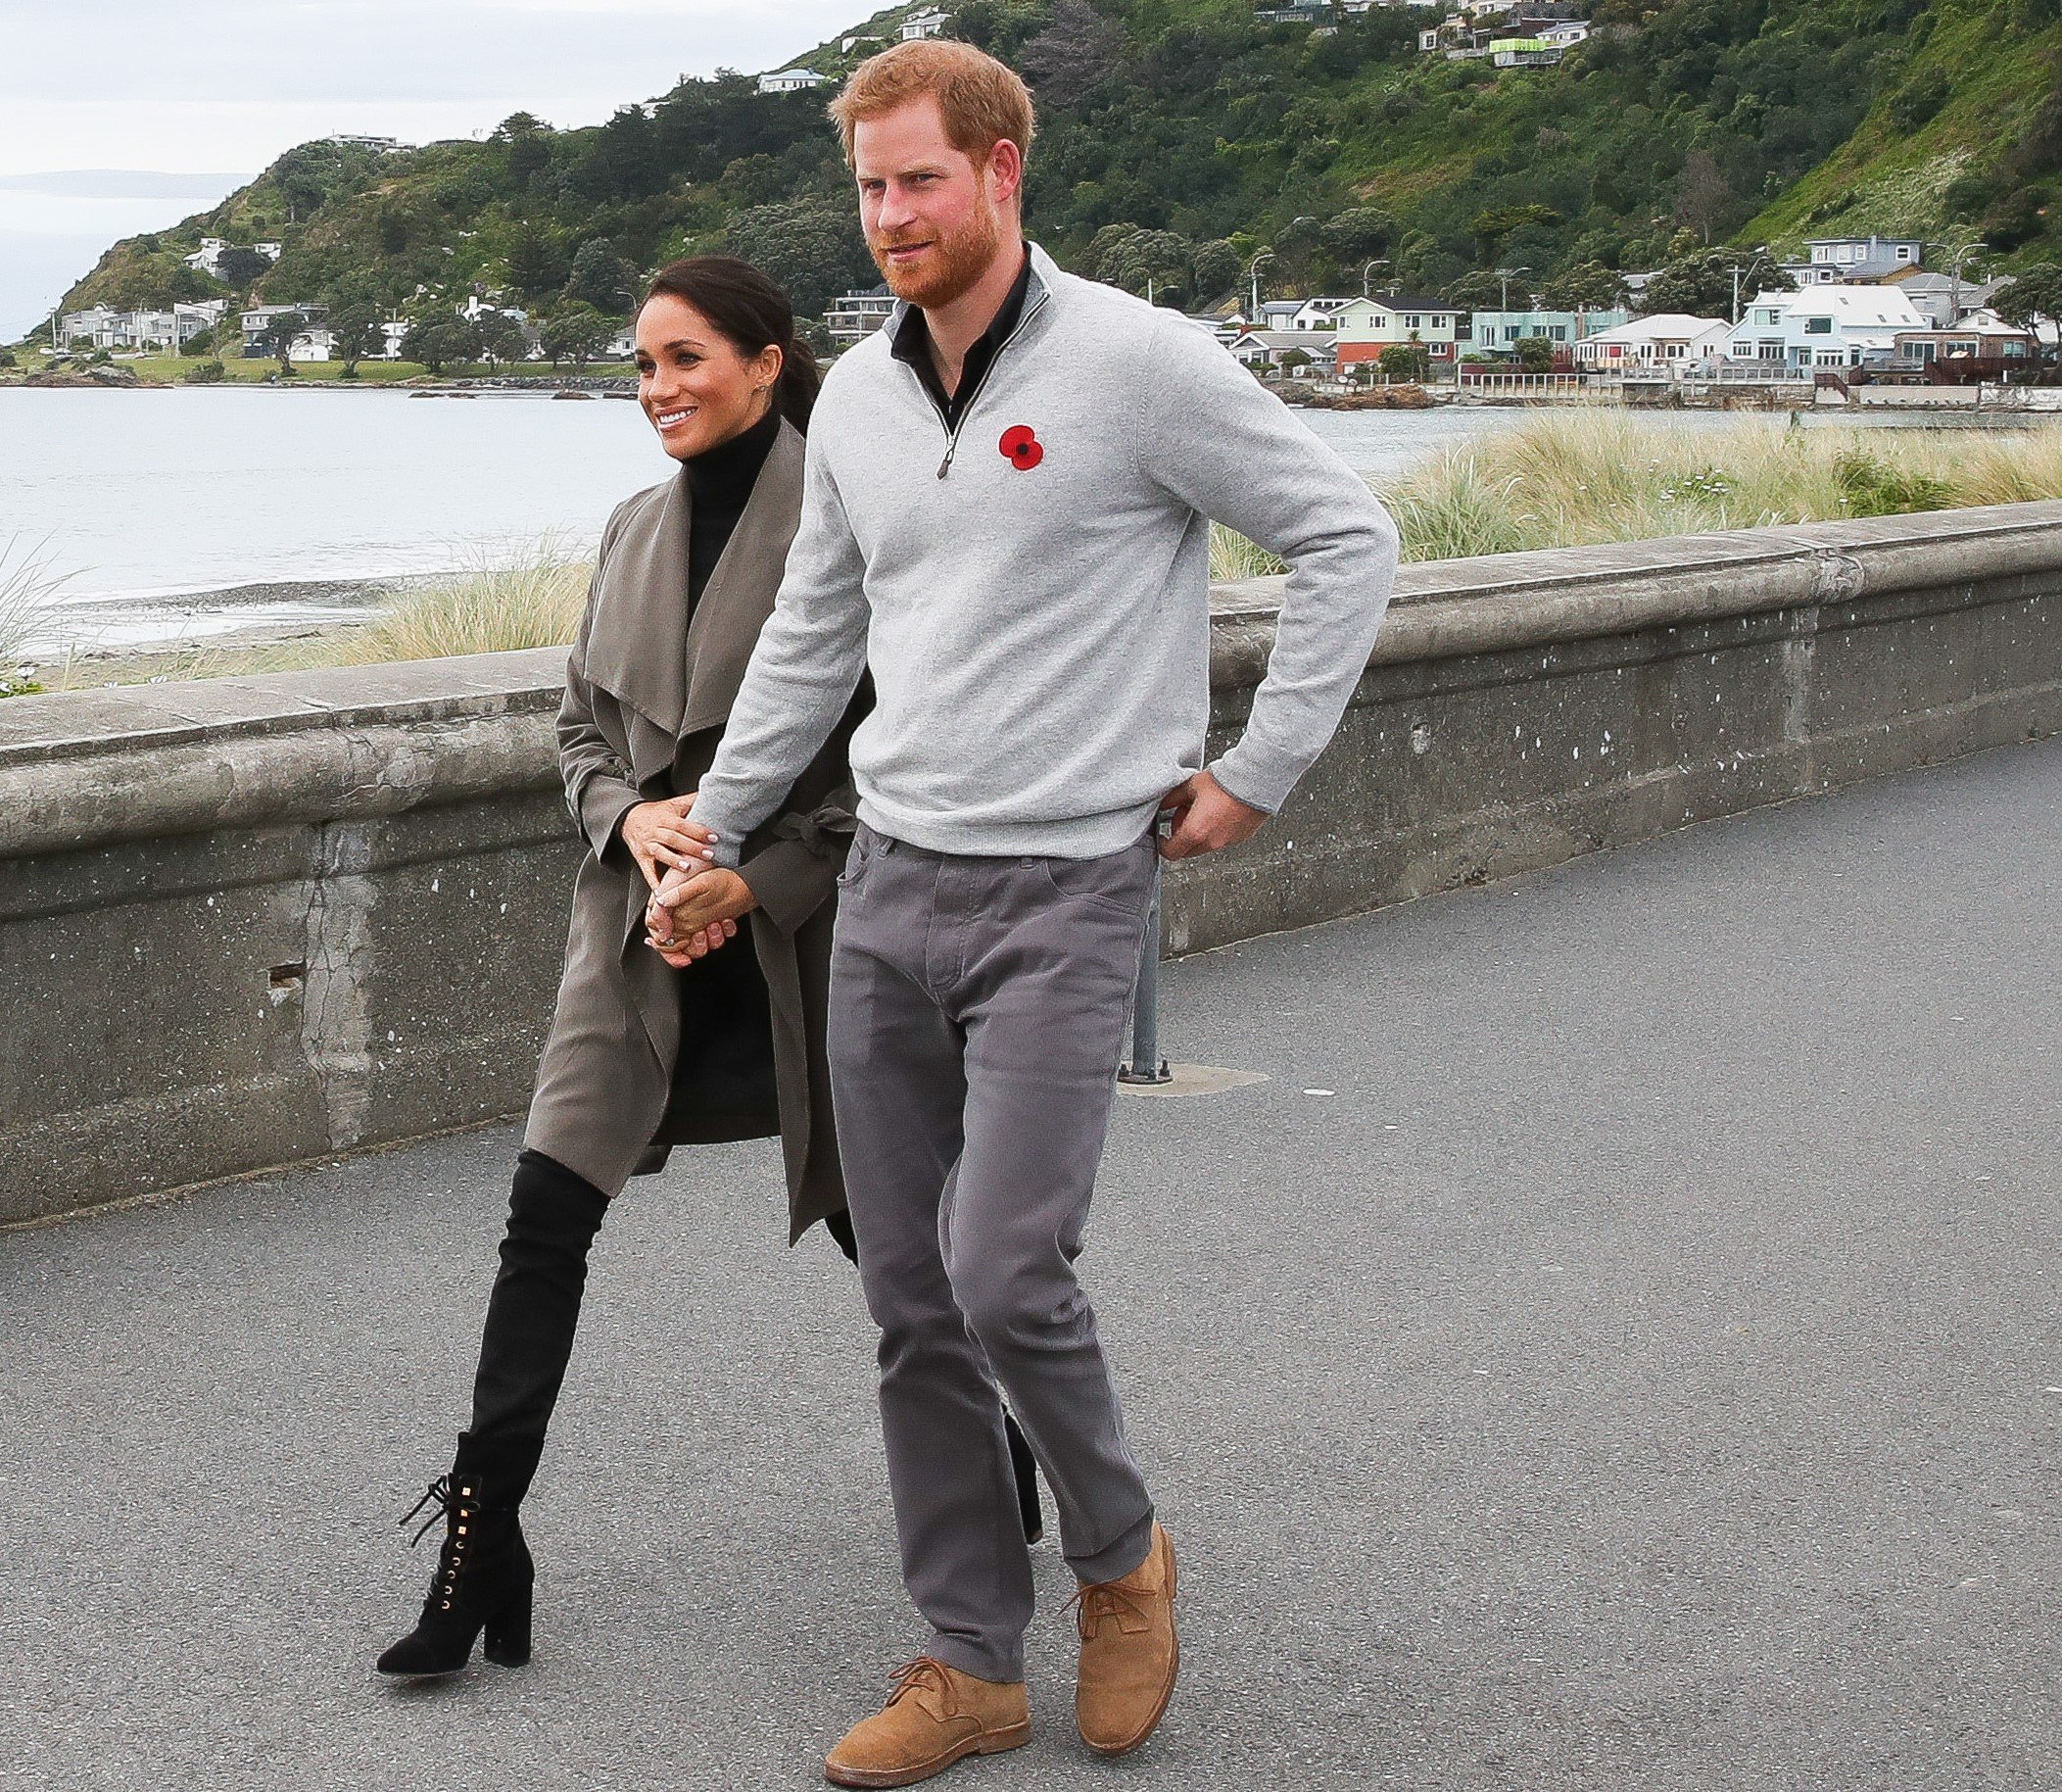 Prince Harry and Meghan Markle walking hand-in-hand to a cafe in New Zealand